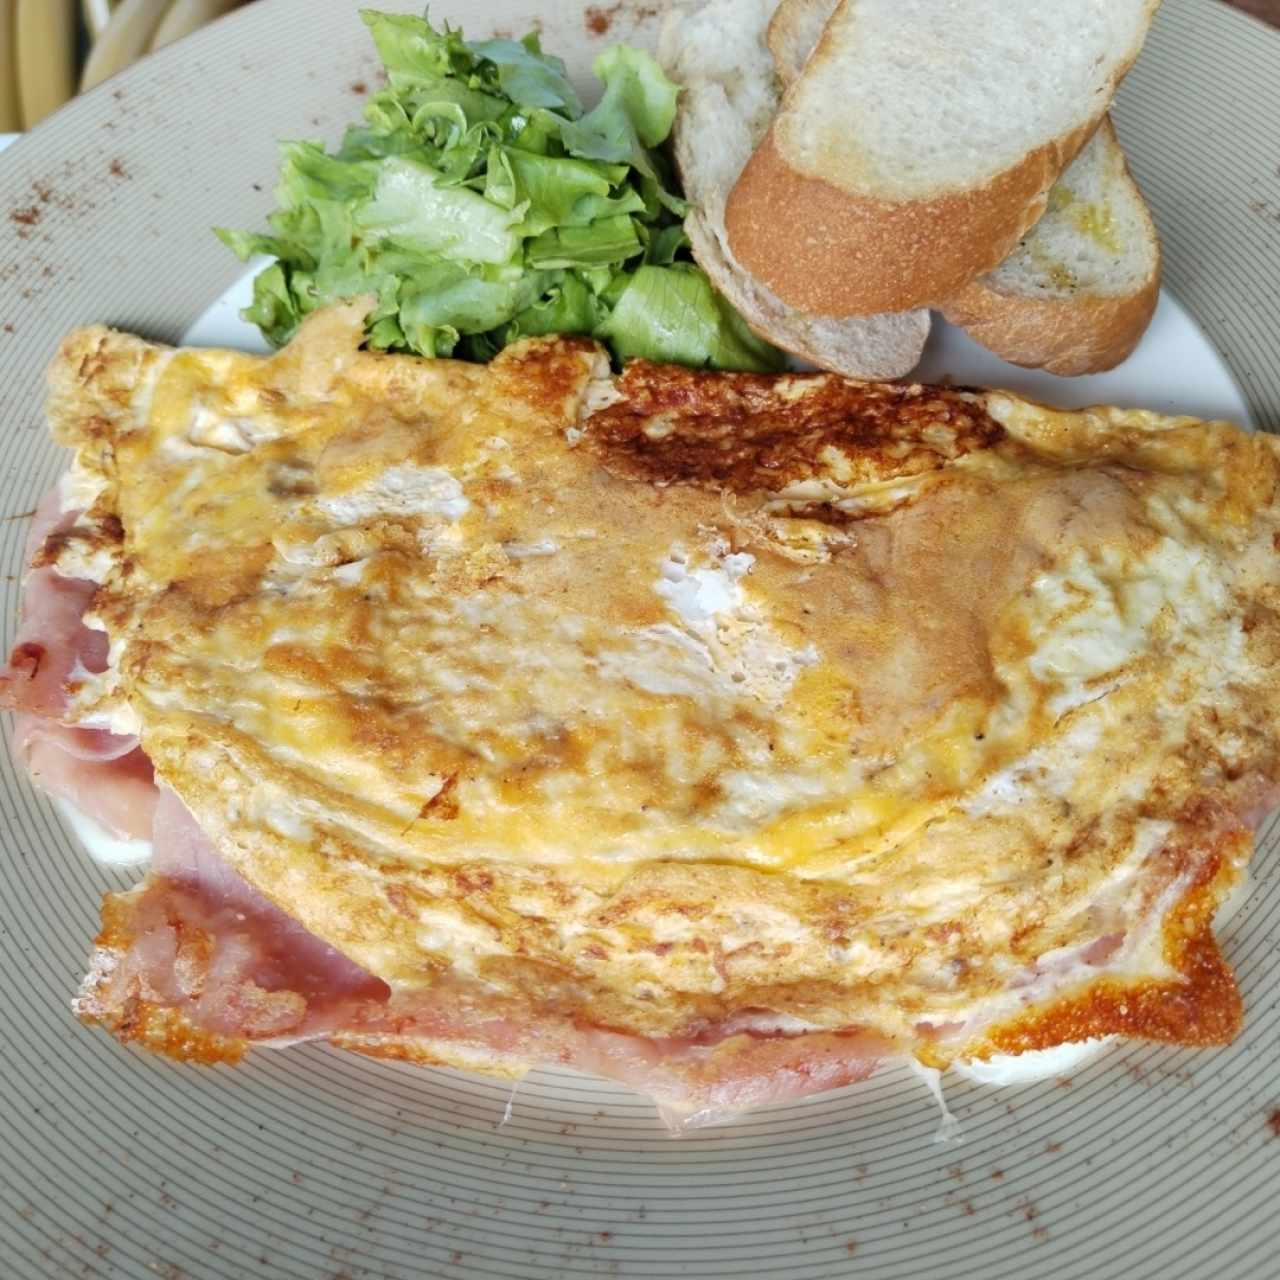 Omelette jamón y queso